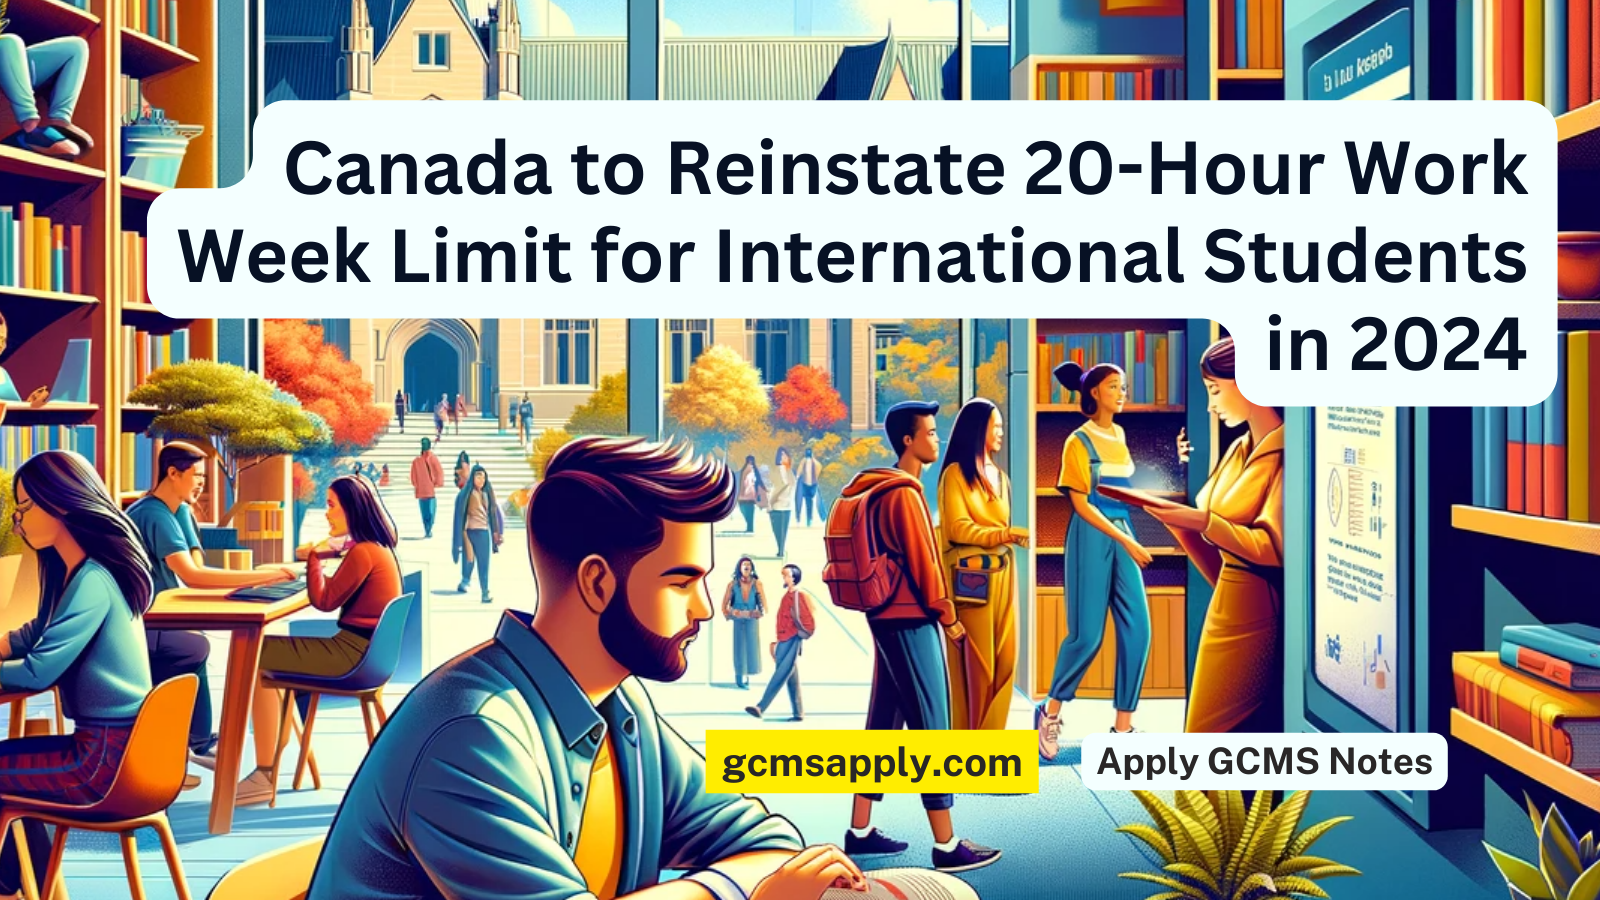 Canada to Reinstate 20-Hour Work Week Limit for International Students in 2024